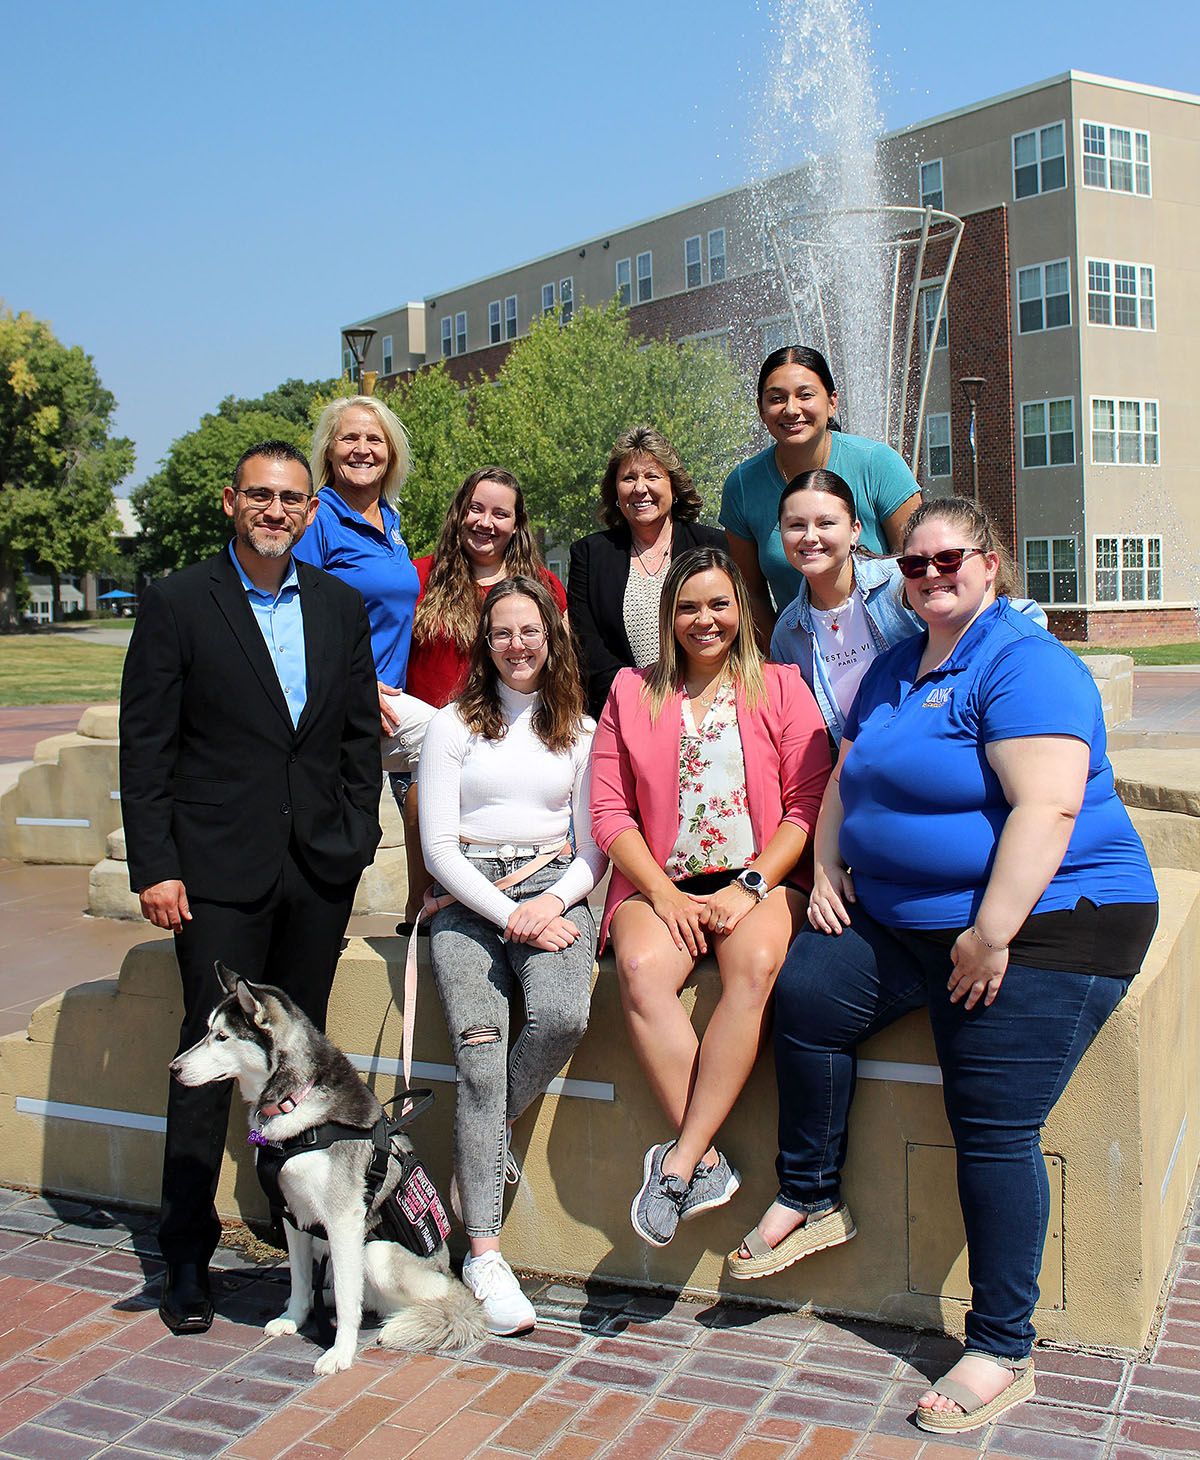 Members of the Behavioral Health Opportunities Program (BHOP) are pictured on the UNK campus. Front row from left, Roger Garcia, associate director of recruitment and retention for the Behavioral Health Education Center of Nebraska (BHECN) at UNMC; UNK students Olivia Longmore, Mariah Seim and Haley Clark; and Marly Brenning, the BHOP coordinator at UNK. Back row from left, Krista Fritson, a psychology professor and director of the BHECN site at UNK; and UNK students Johanna McClure, Robyn Springer and Juana Perez. (Photo courtesy of BHECN)